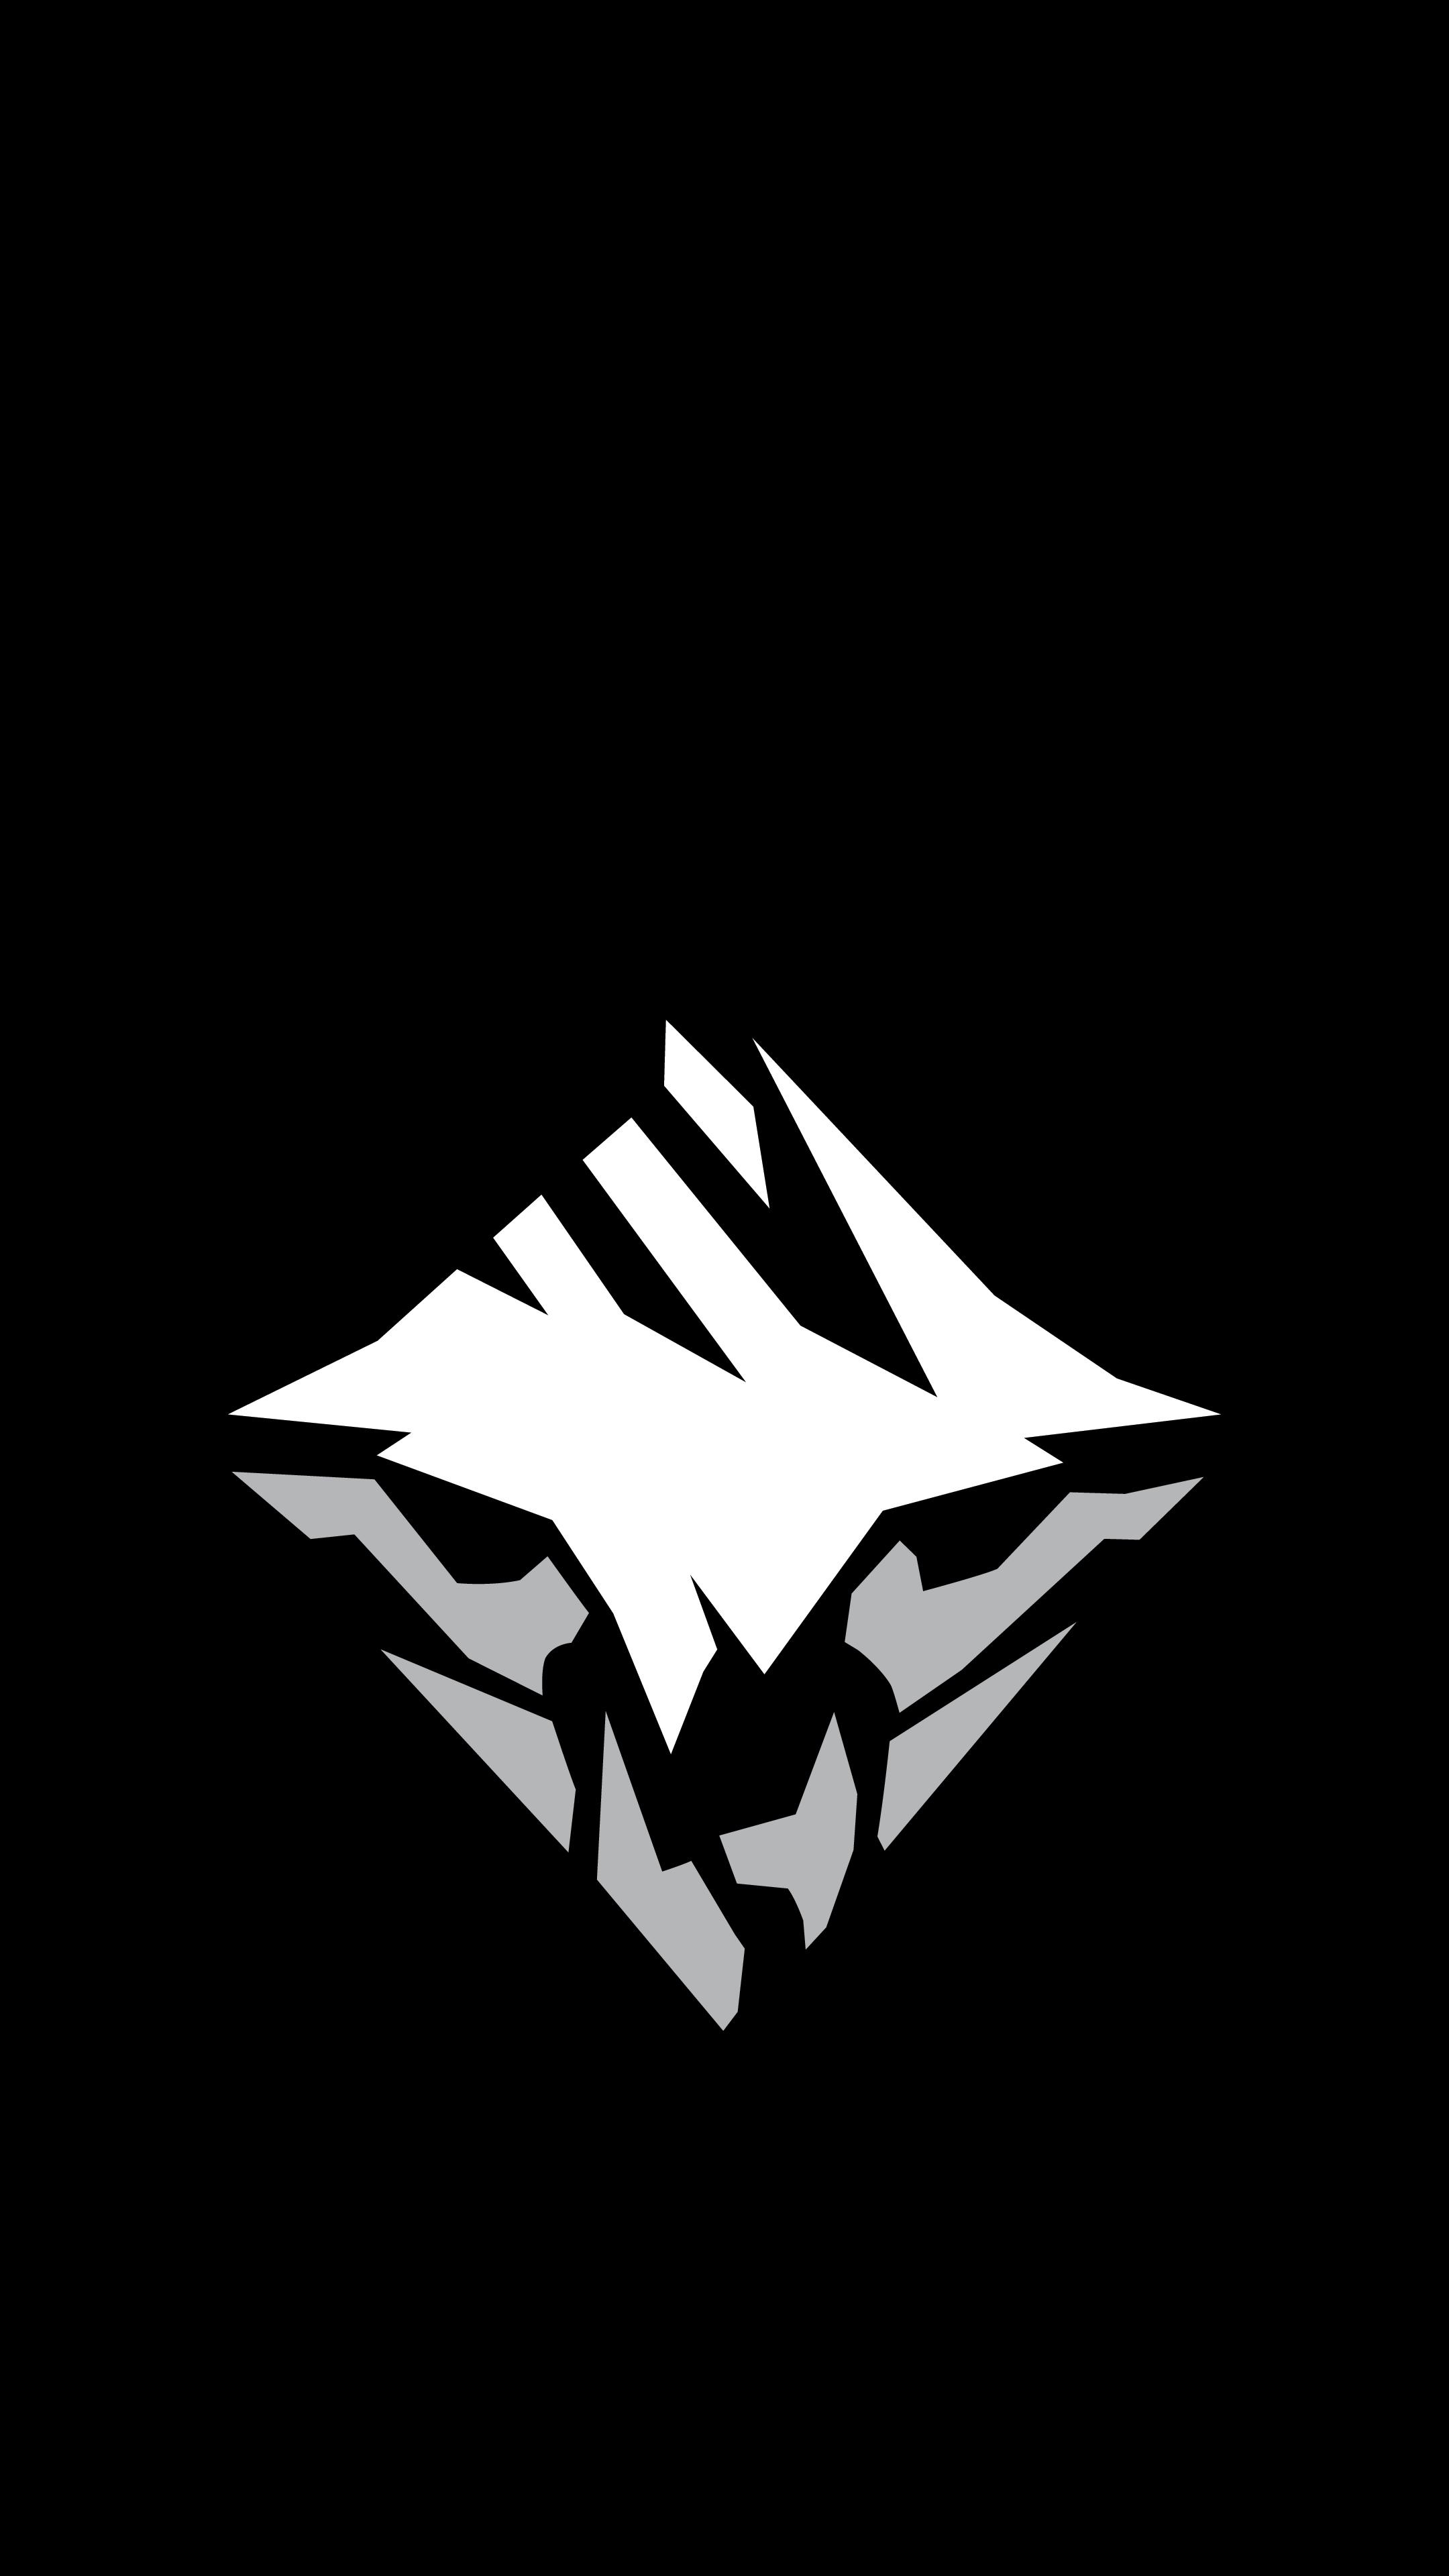 I was sick of not finding simple dauntless mobile wallpaper so I